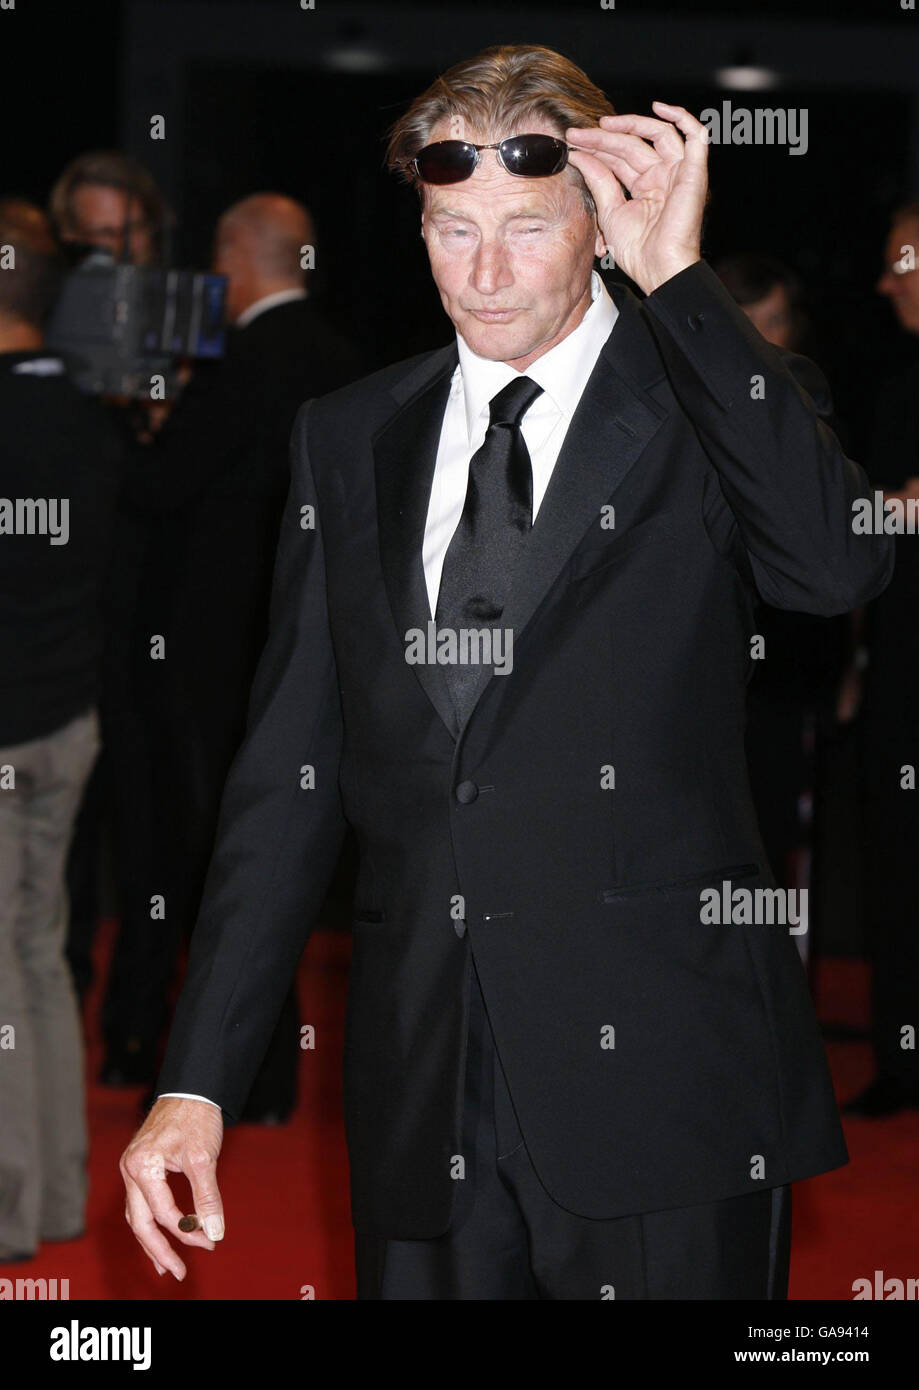 AP OUT Sam Shepard arrives for the premiere of 'The Assassination of Jesse James' premiere at the Venice Film Festival, Italy. Picture date: Sunday 2 September, 2007. Photo credit should read: Yui Mok/PA Wire Stock Photo